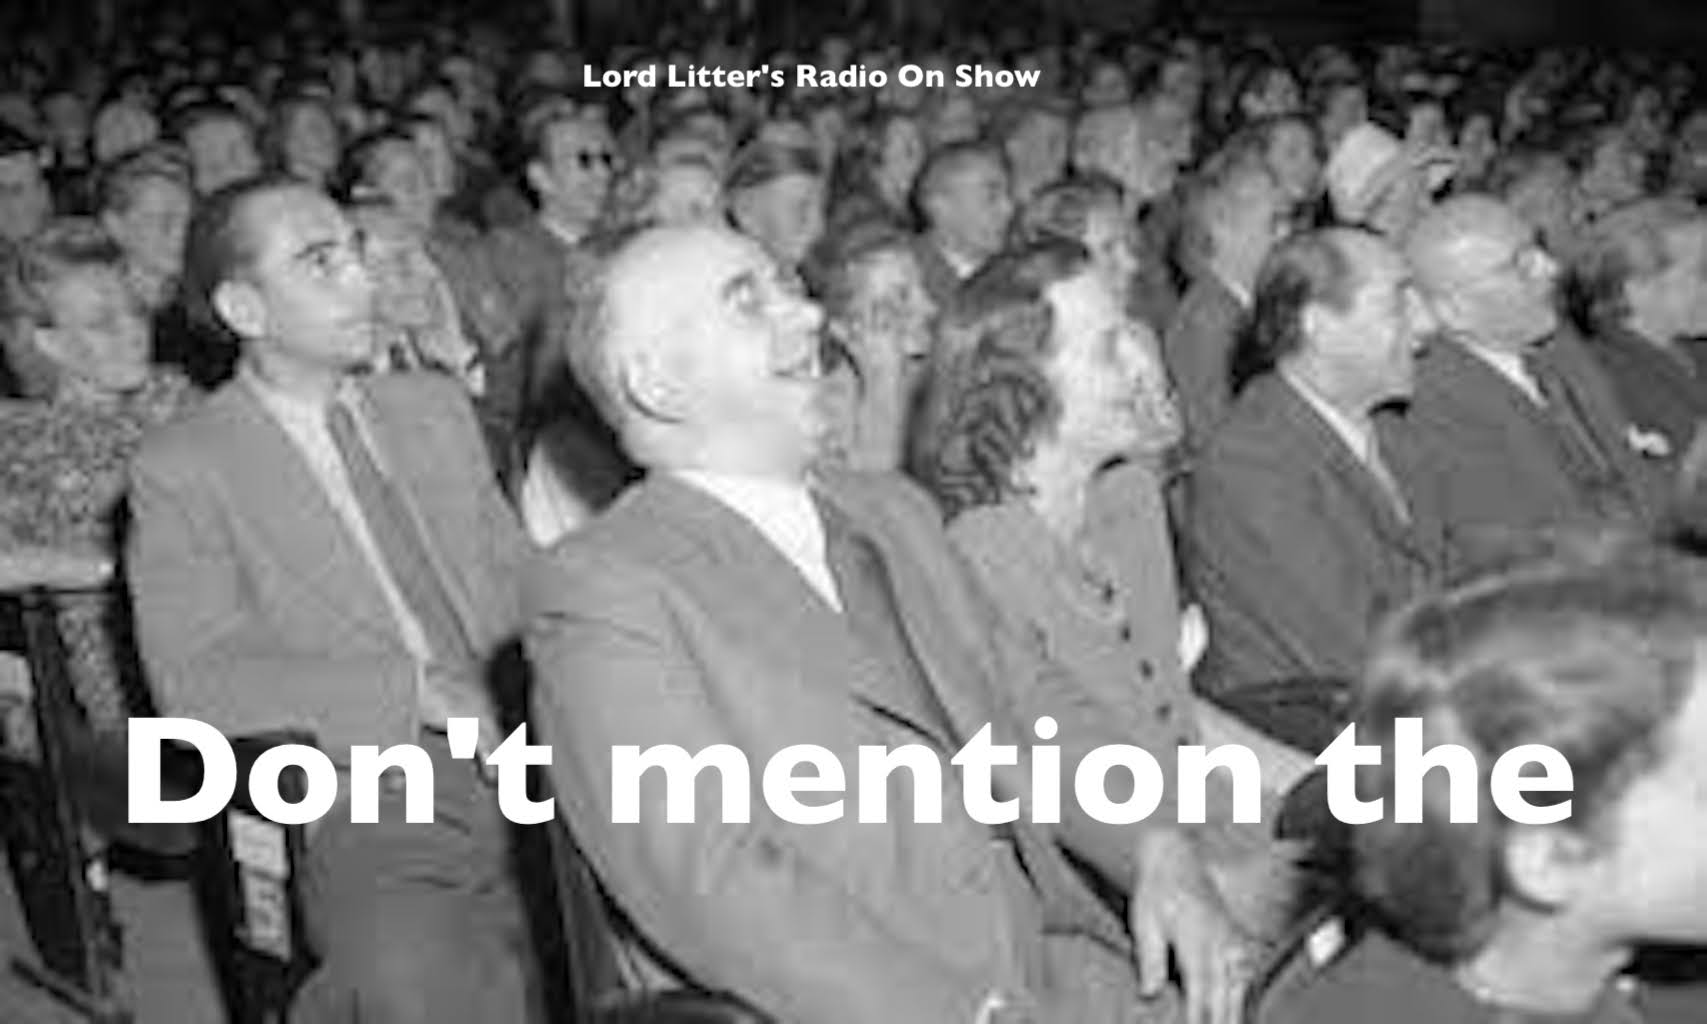 Lord Litter’s Radio On Show – Don’t mention the